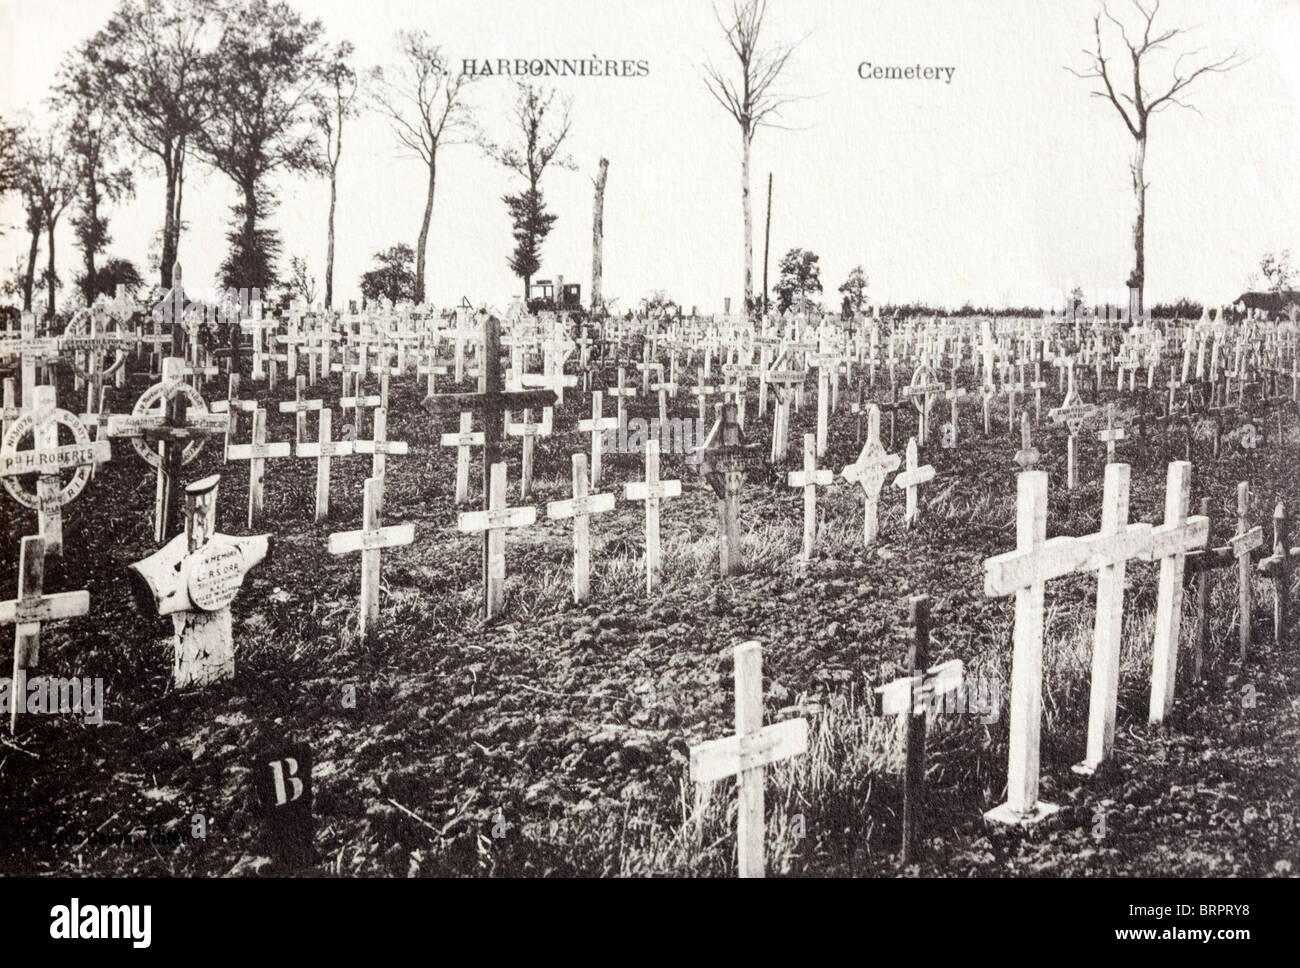 Original World War I cemetery with wooden crosses at Harbonnières in the Somme, France before replacement with headstones. Stock Photo